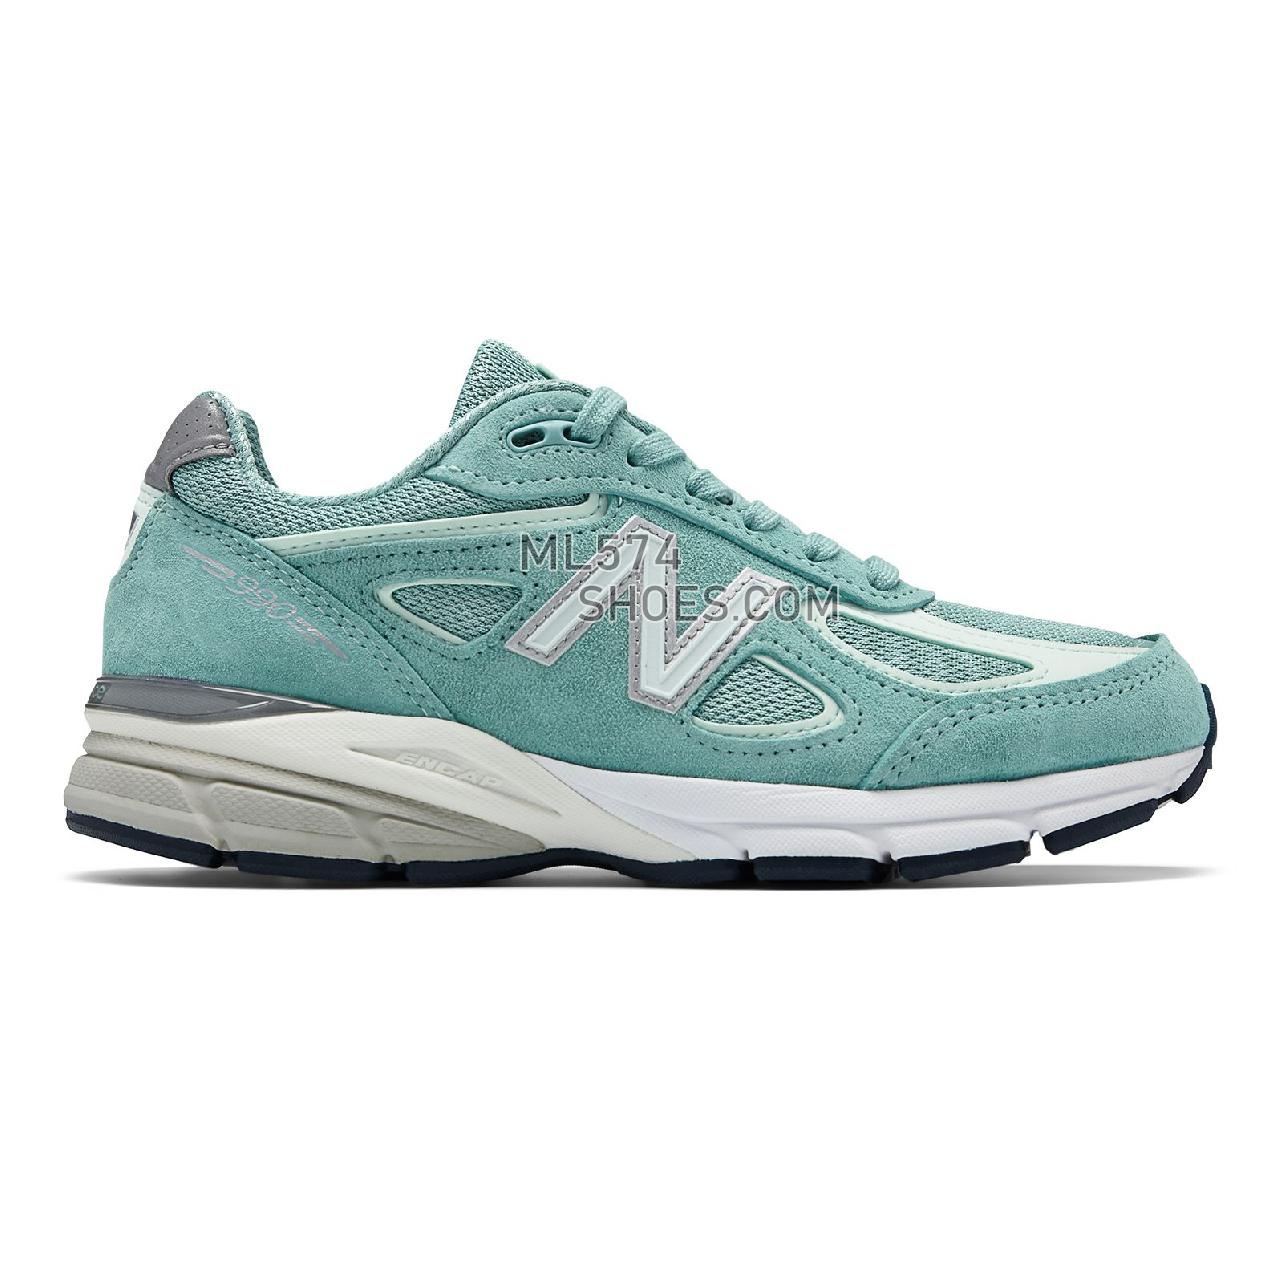 New Balance Mens 990v4 Made in US - Men's 990 - Running Mineral Sage with Seafoam - M990MS4